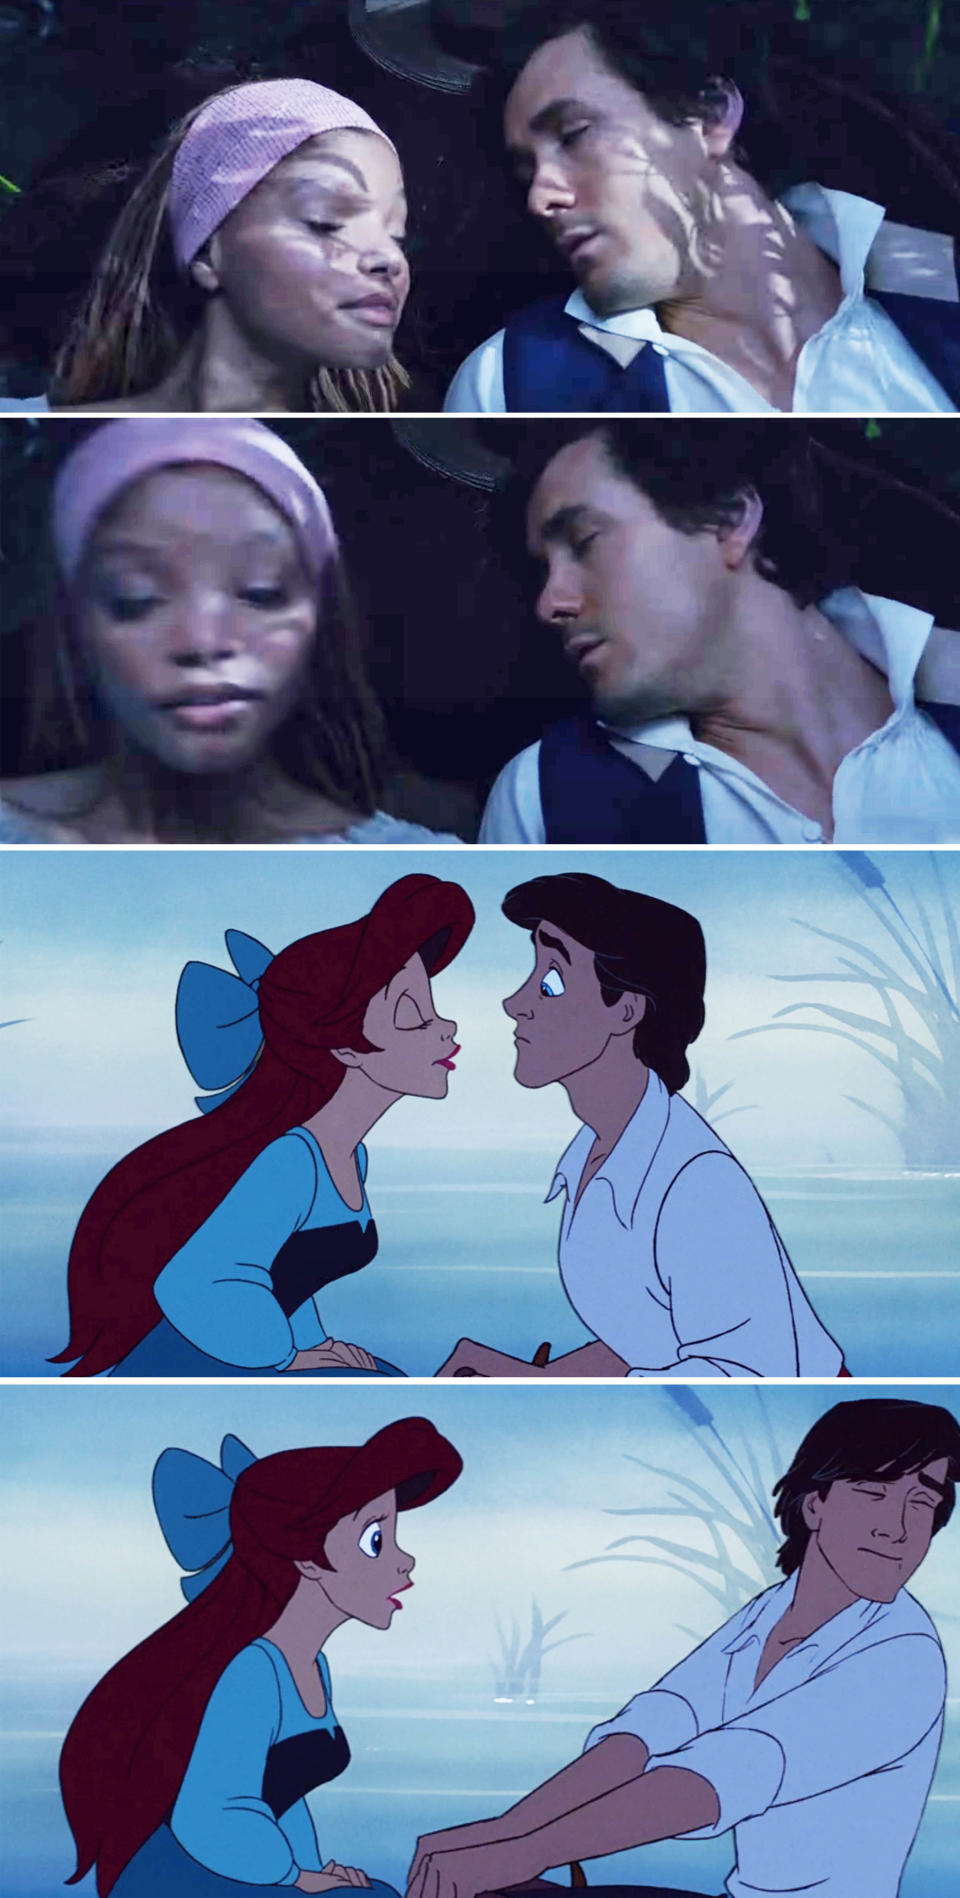 Screenshots from both "The Little Mermaid" films